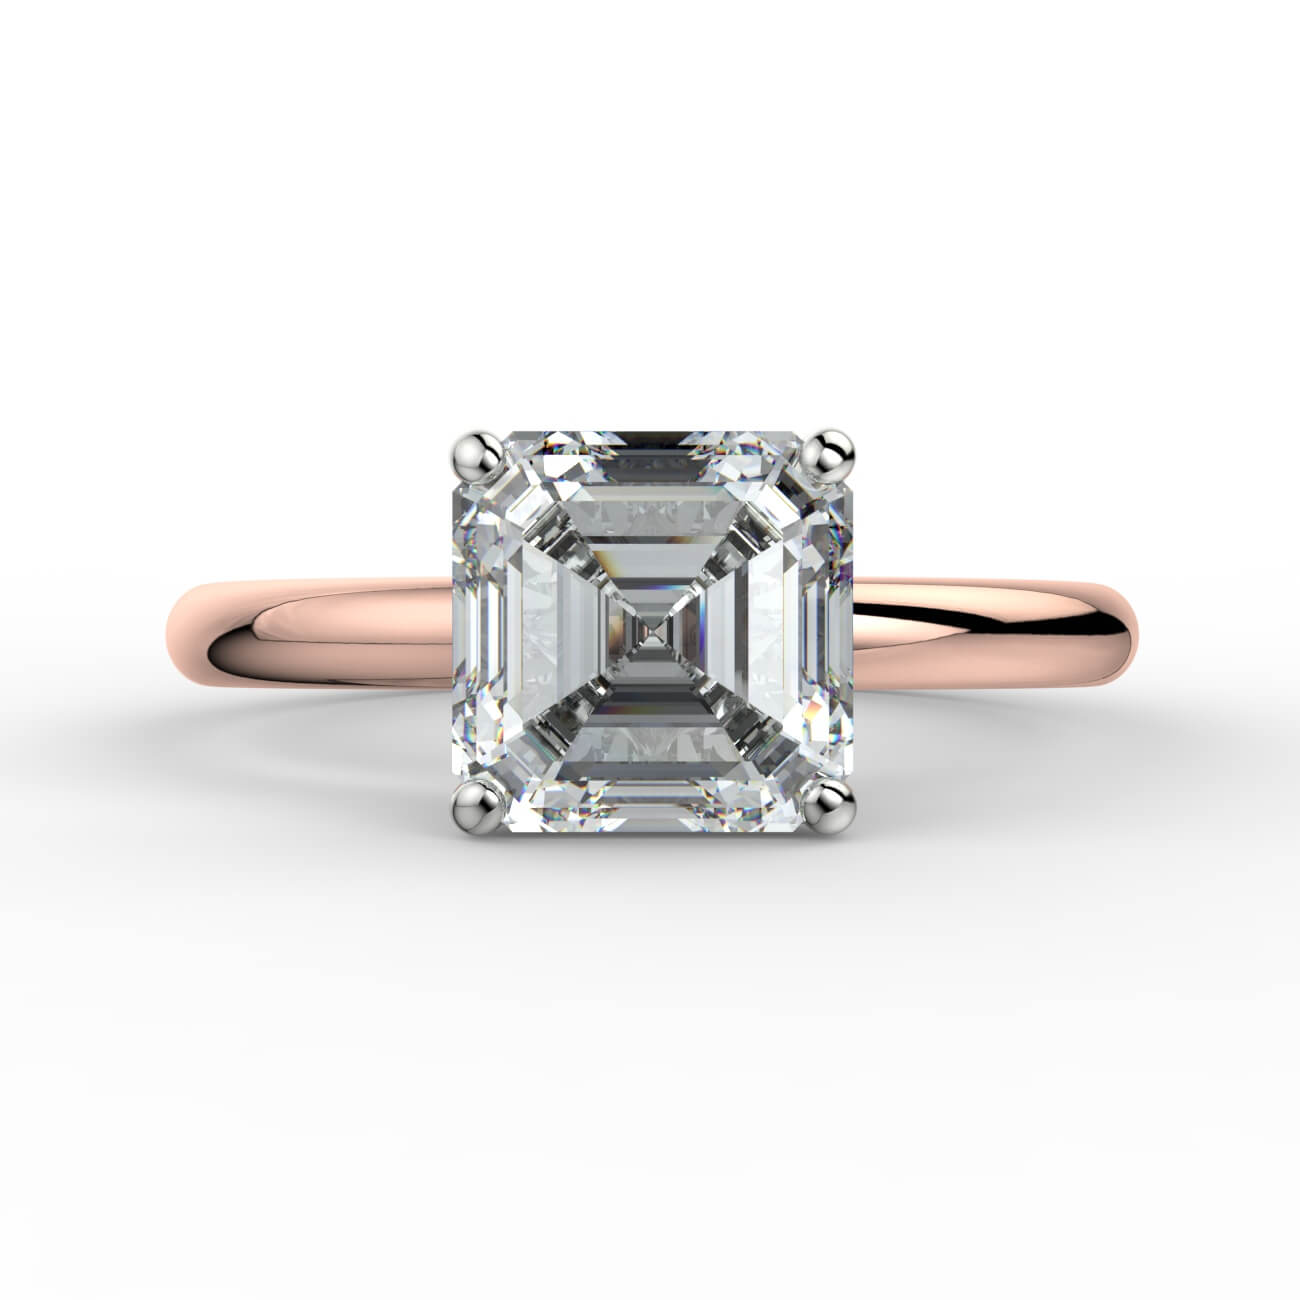 Comfort fit 4 claw asscher cut solitaire diamond ring in rose and white gold – Australian Diamond Network